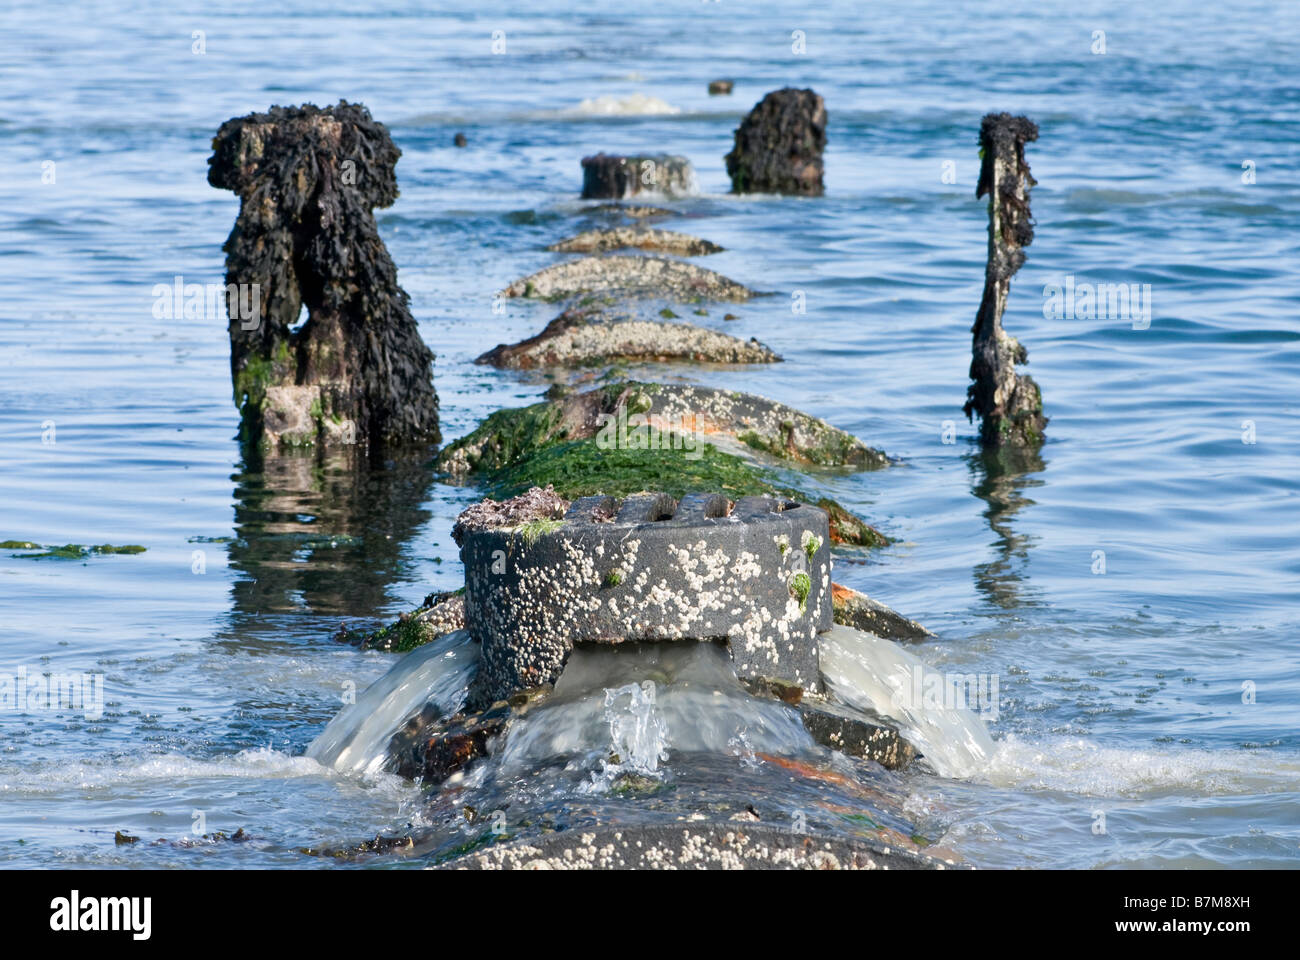 Raw sewage being discharged into shallow sea from the vent in a sewage outfall pipe. Stock Photo